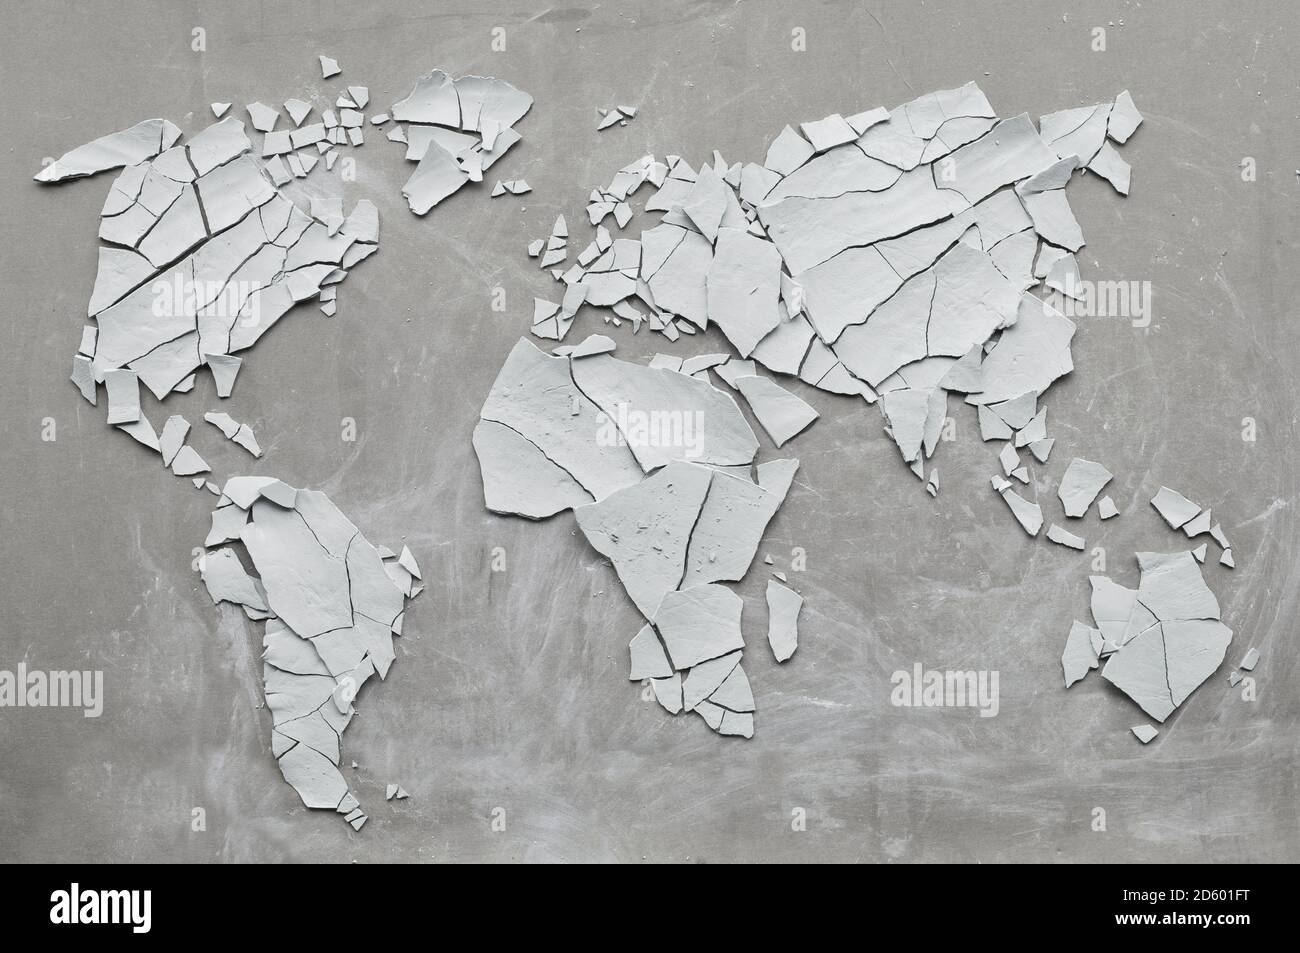 Clay shards forming world map, broken, concept ecological disasters Stock Photo